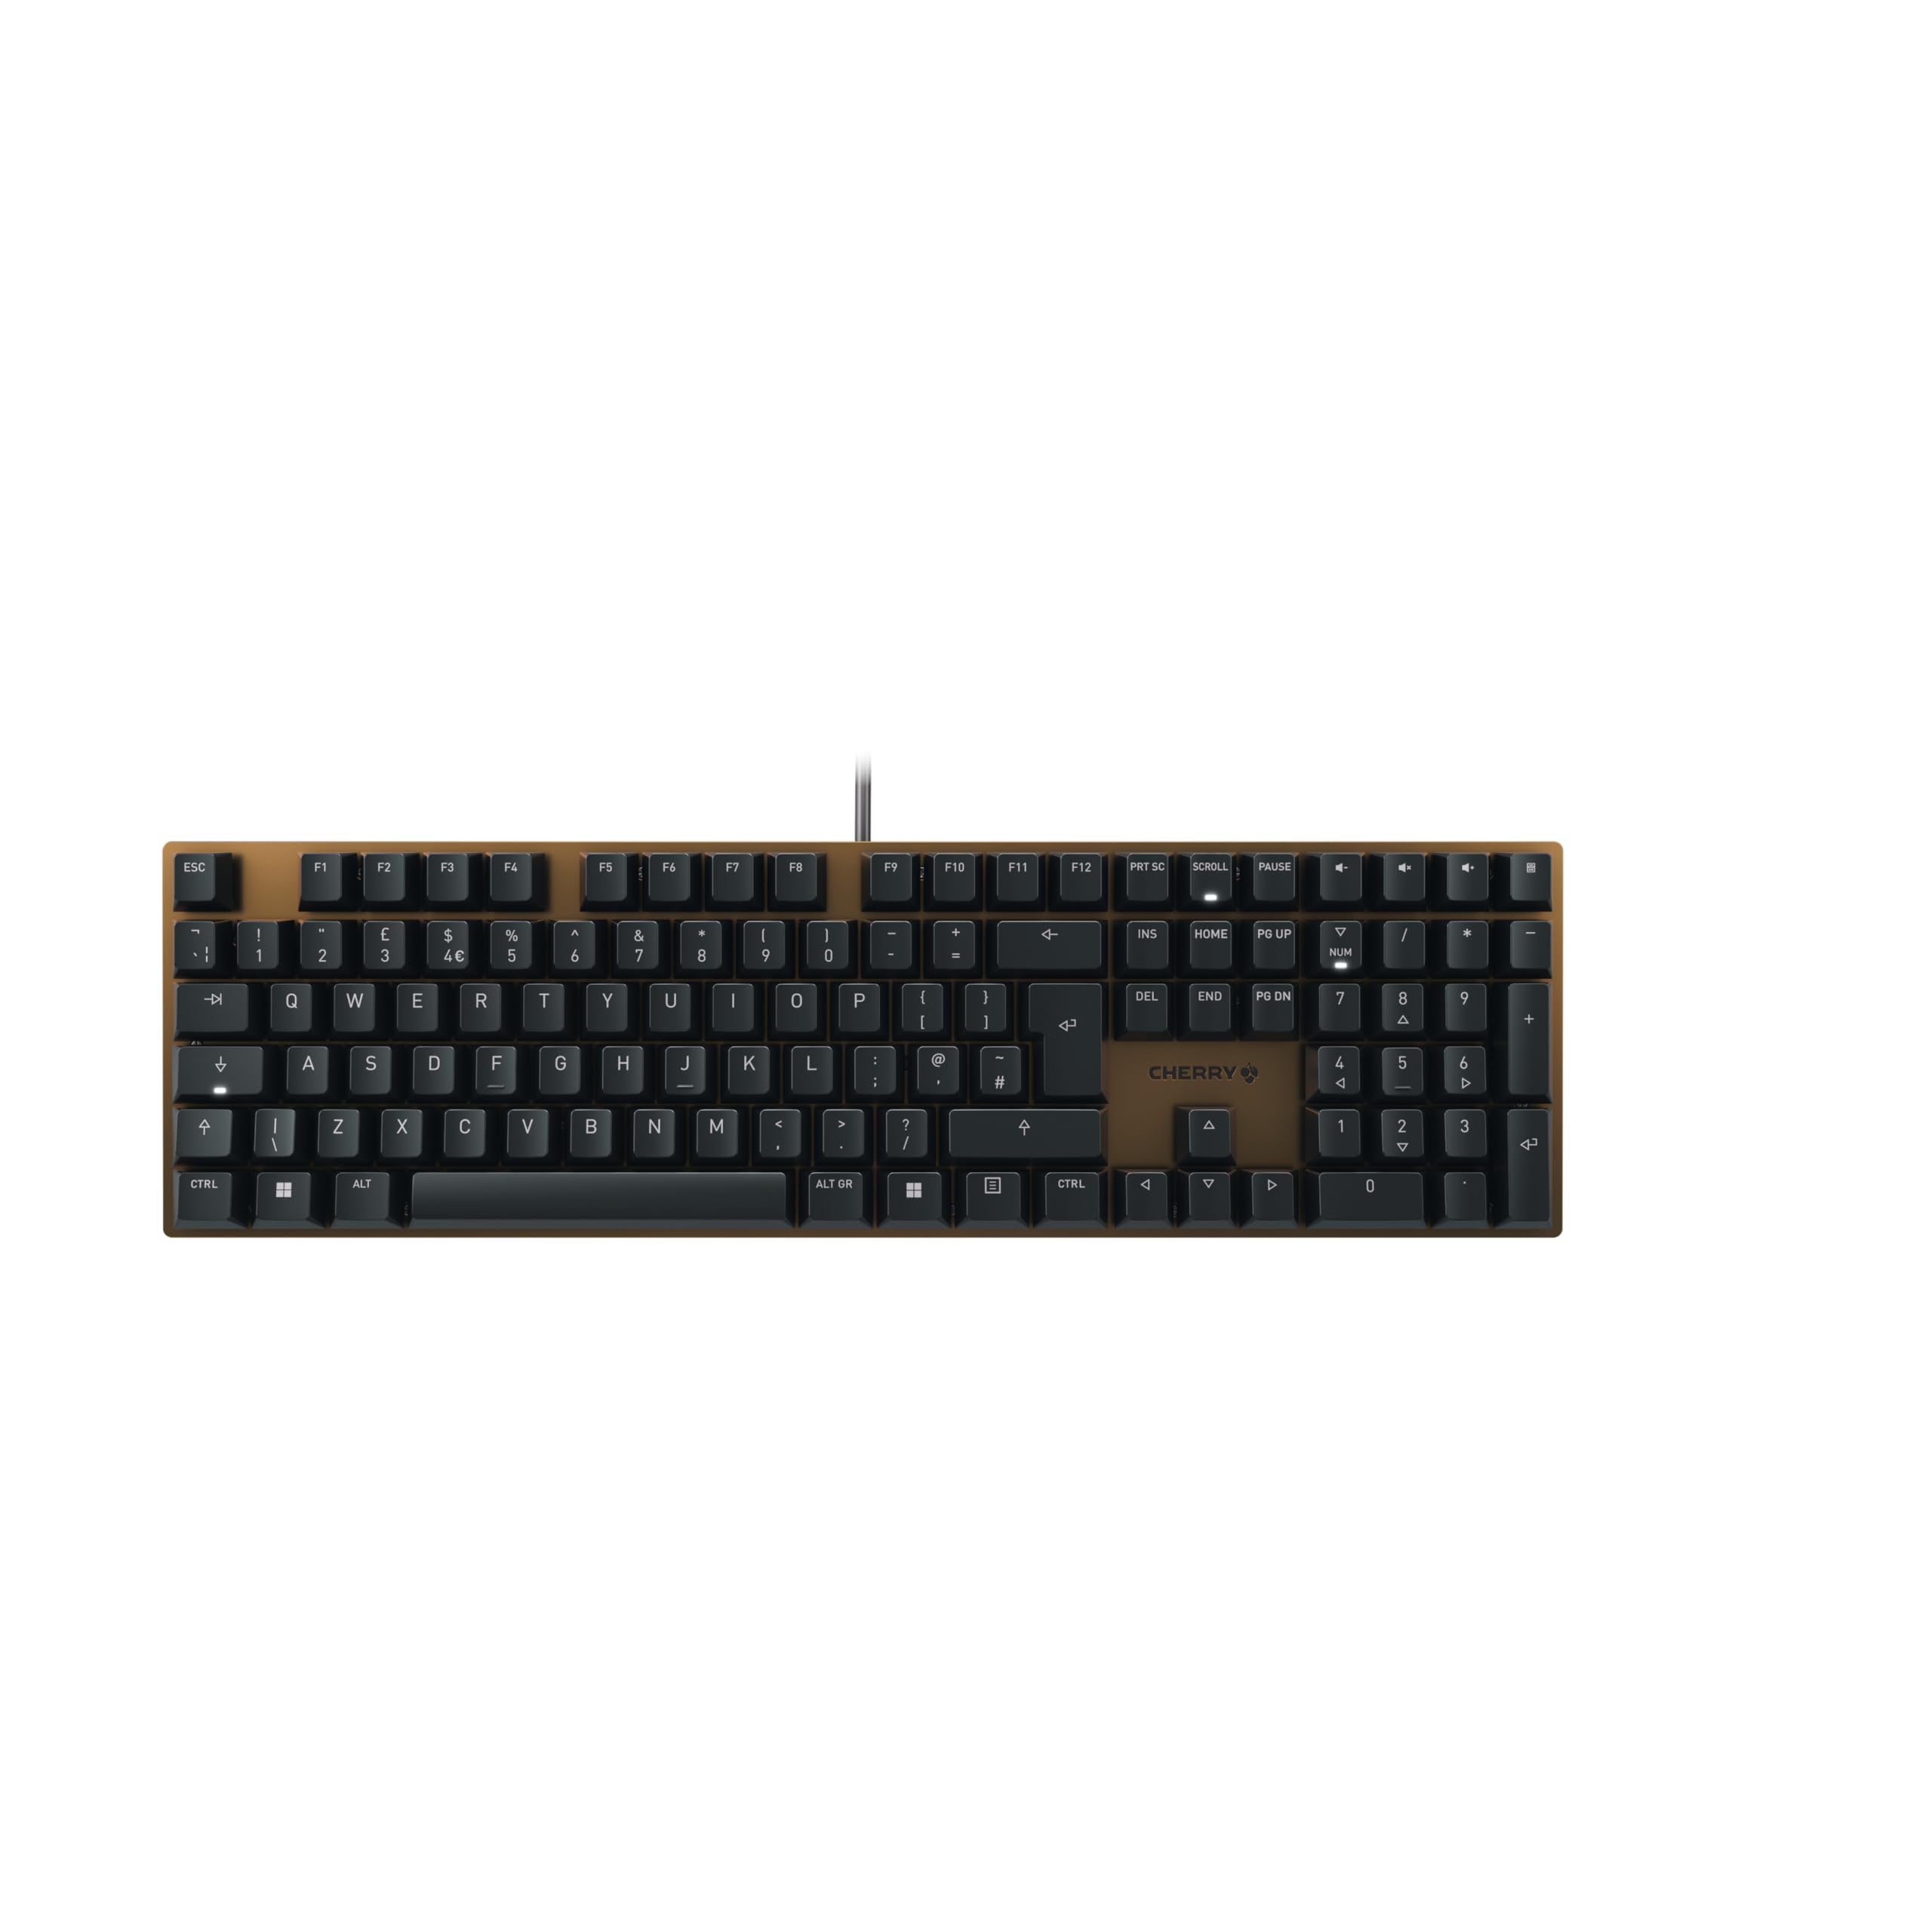 CHERRY KC 200 MX, mechanical office keyboard, British layout (QWERTY), elegant design with anodized metal plate, wired, MX2A SILENT RED switches, Black/Bronze